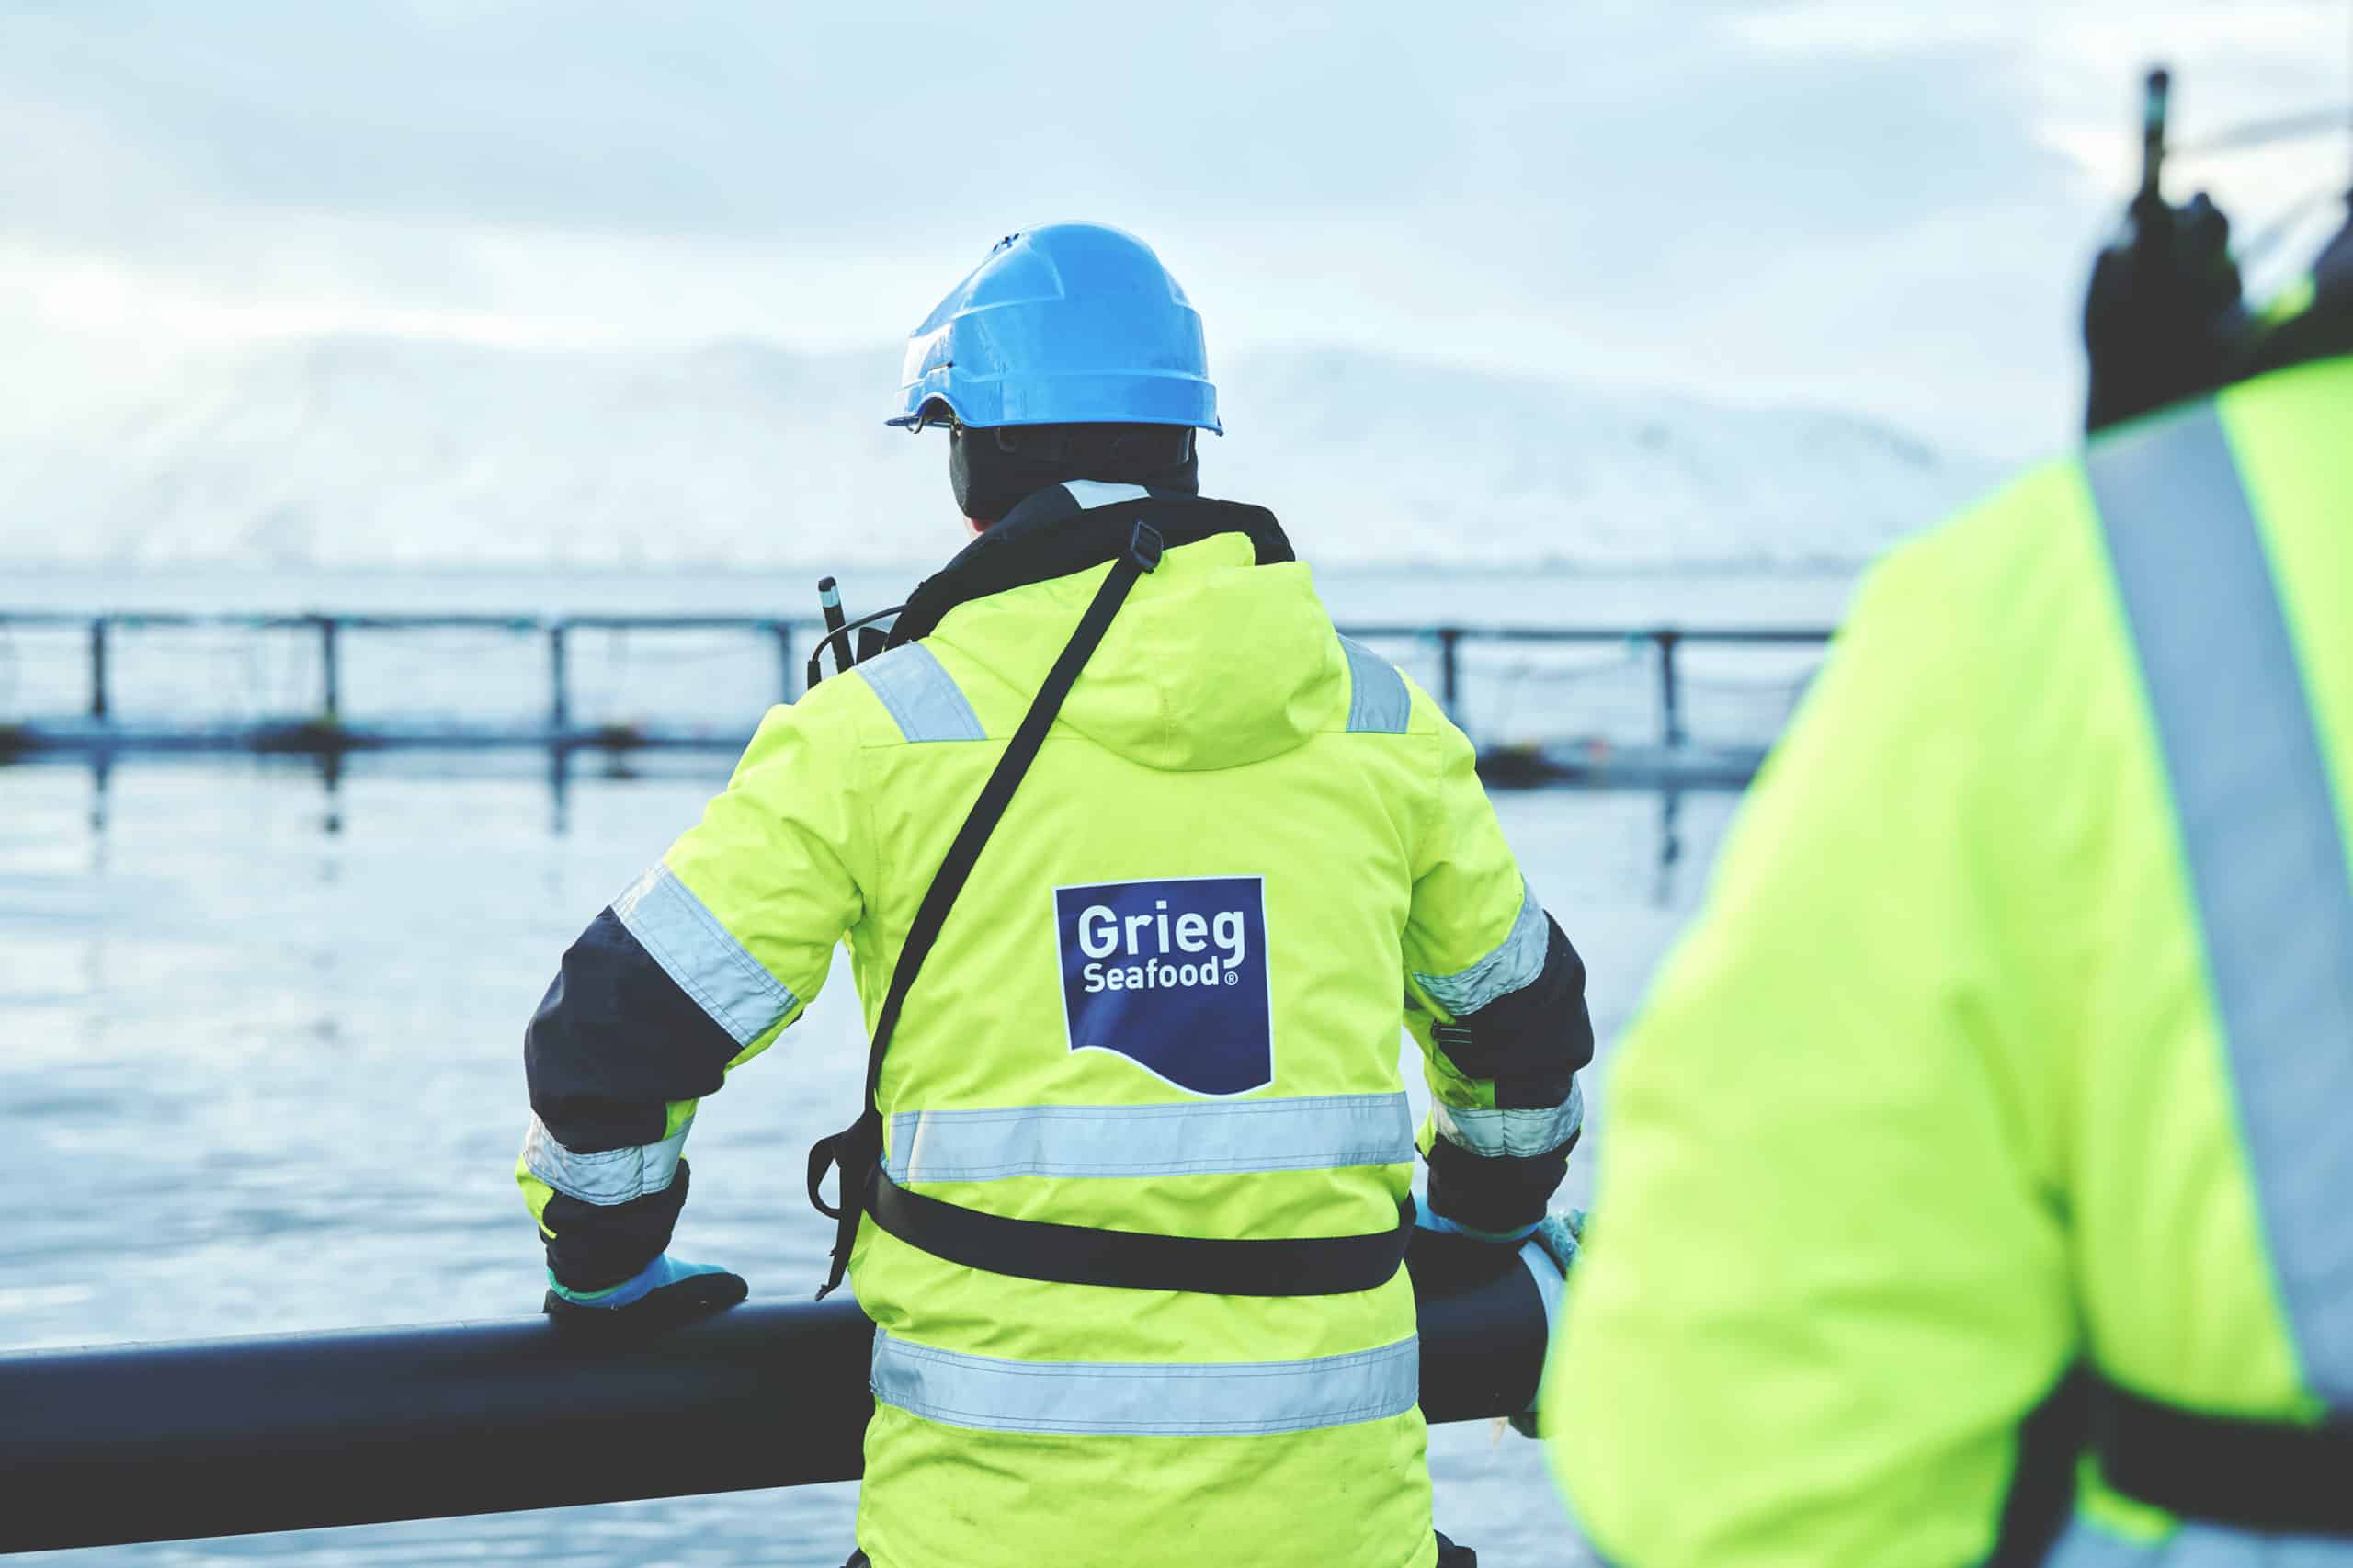 Grieg Seafood employee wearing uniform and helmet as he looks out over a cage of salmon farming.